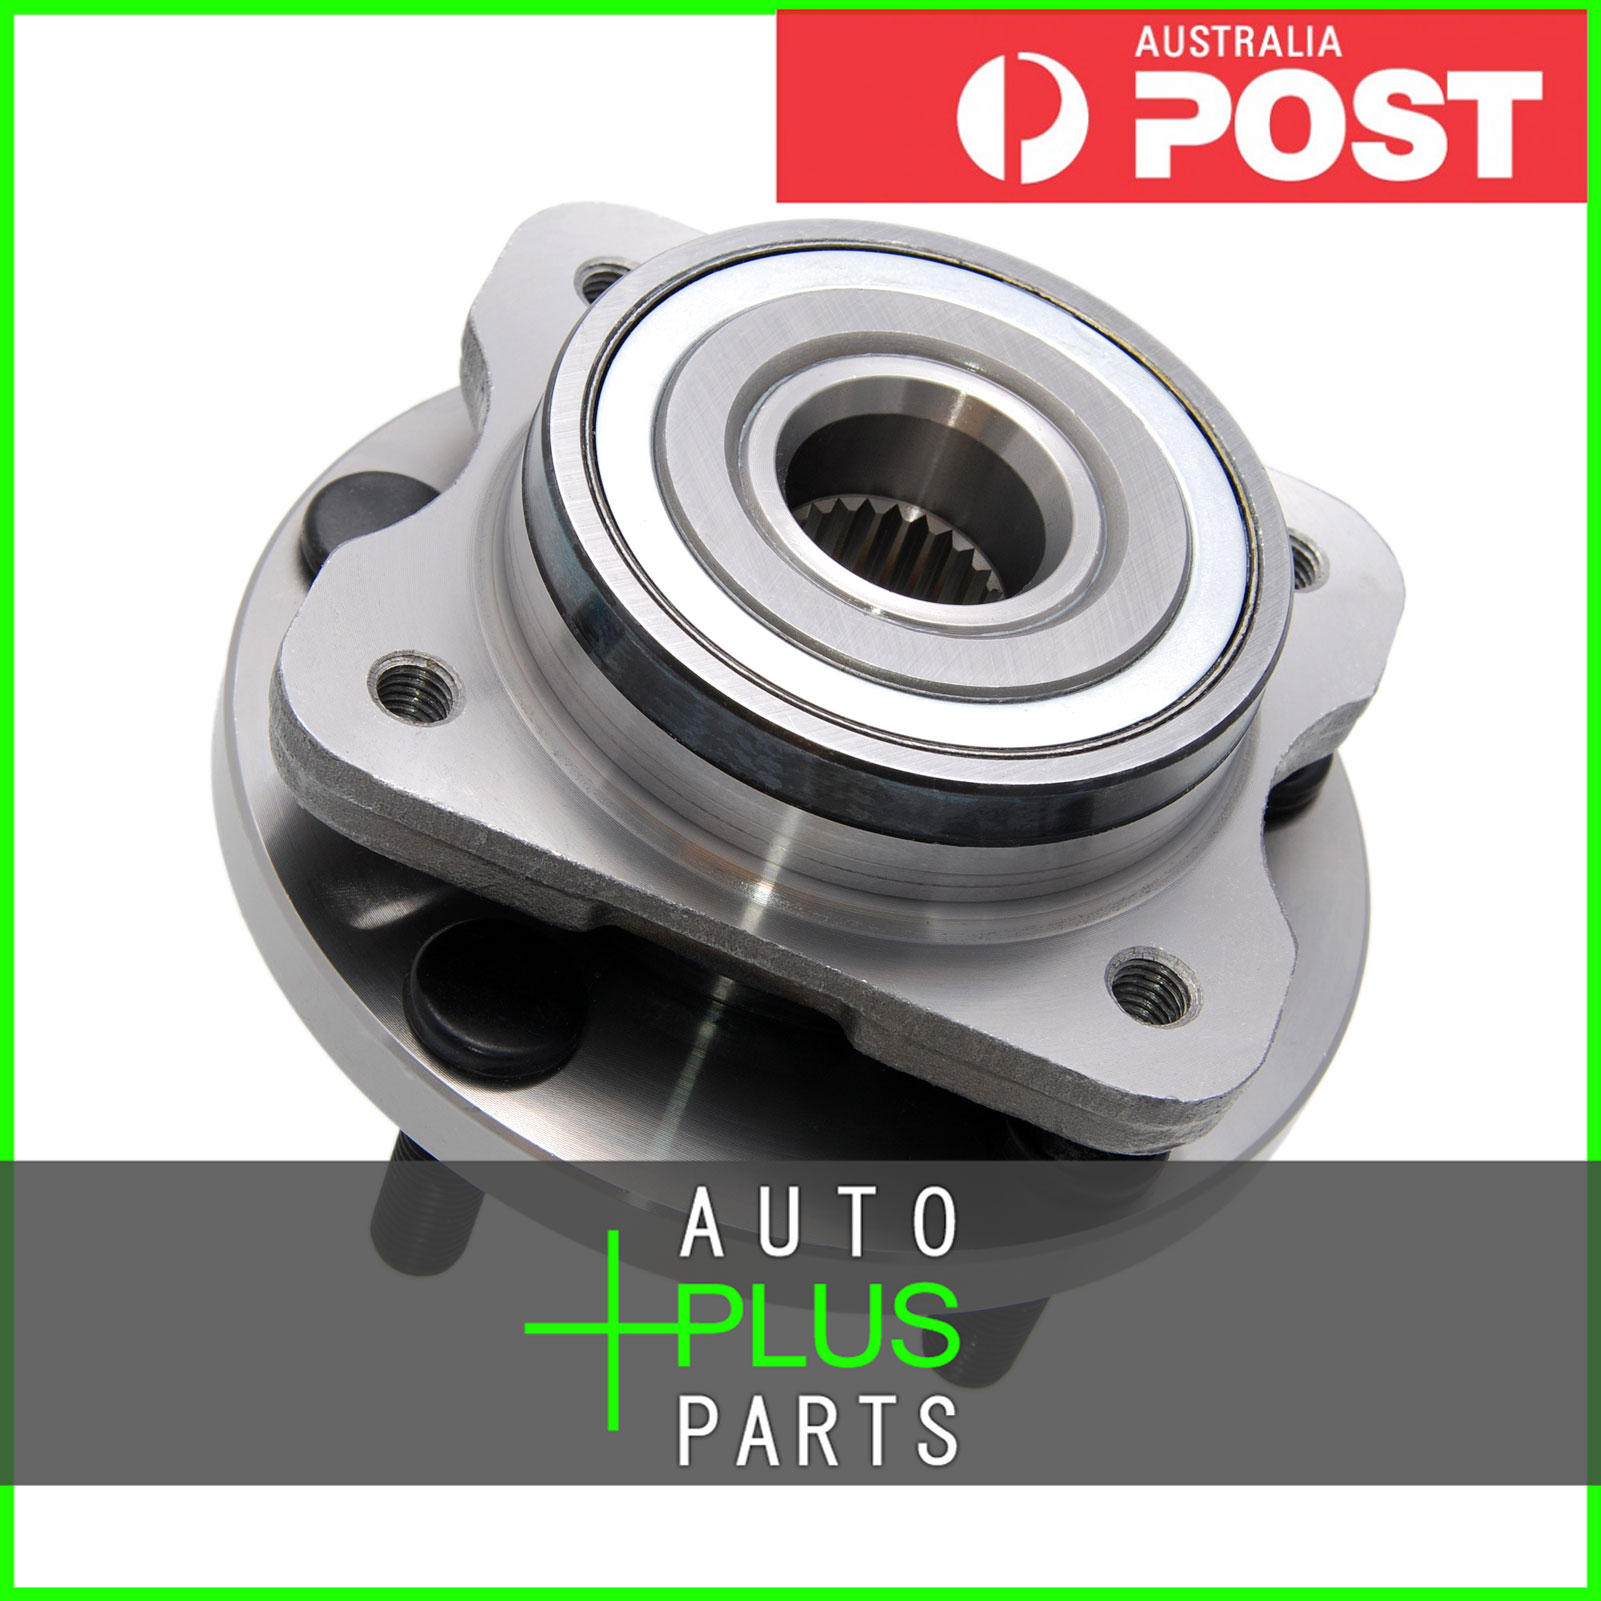 Fits CHRYSLER VOYAGER III 1996-2000 - Front Wheel Bearing Hub Product Photo